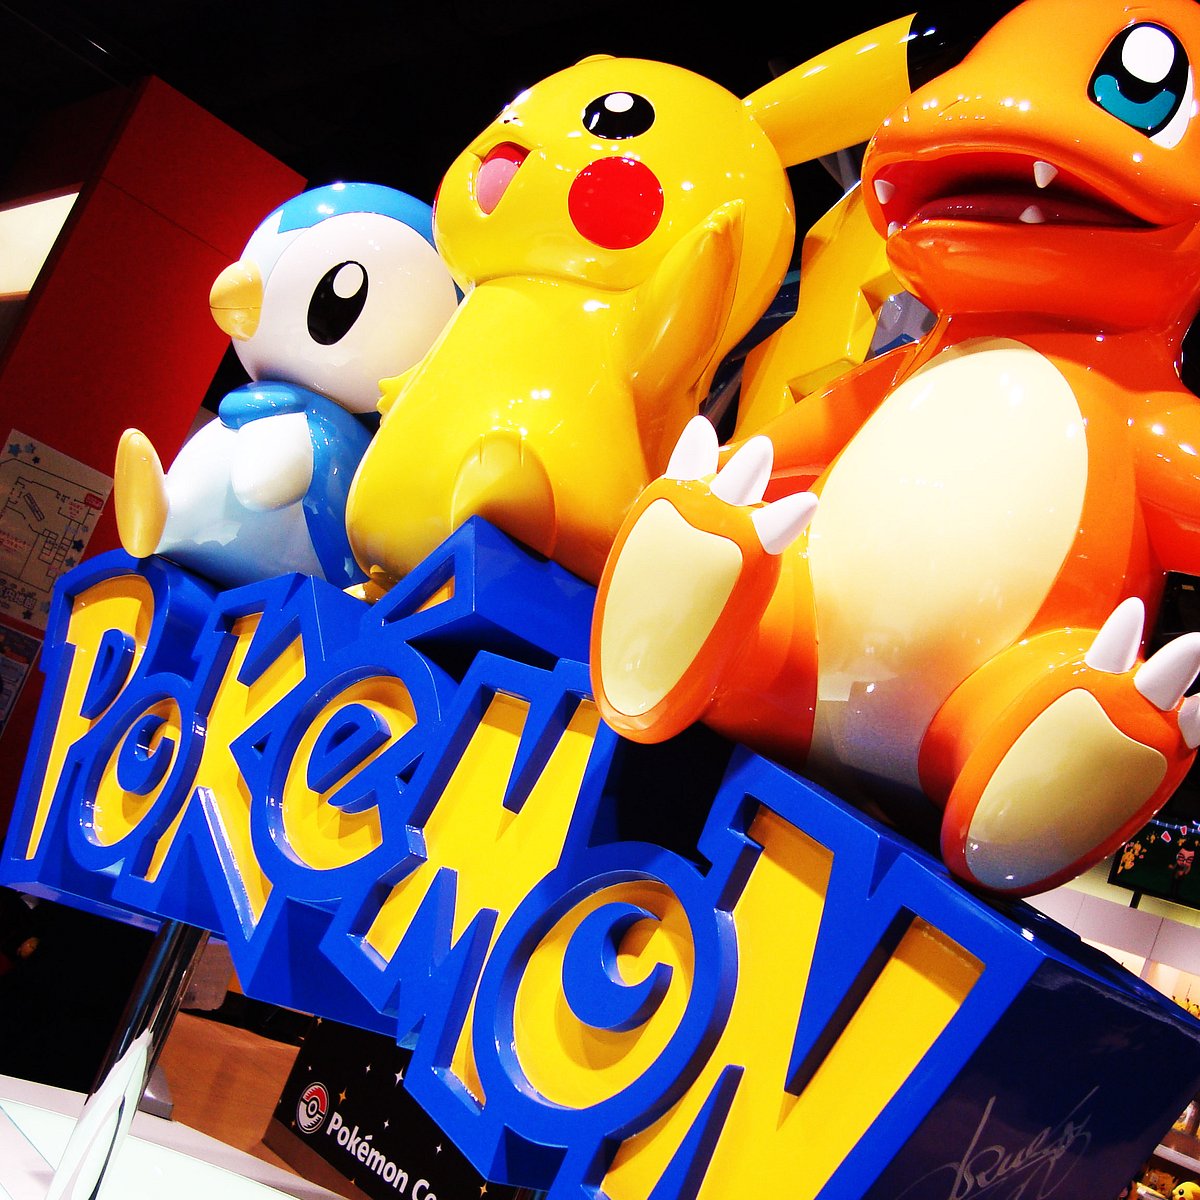 Pokemon Center Tokyo Minato All You Need To Know Before You Go